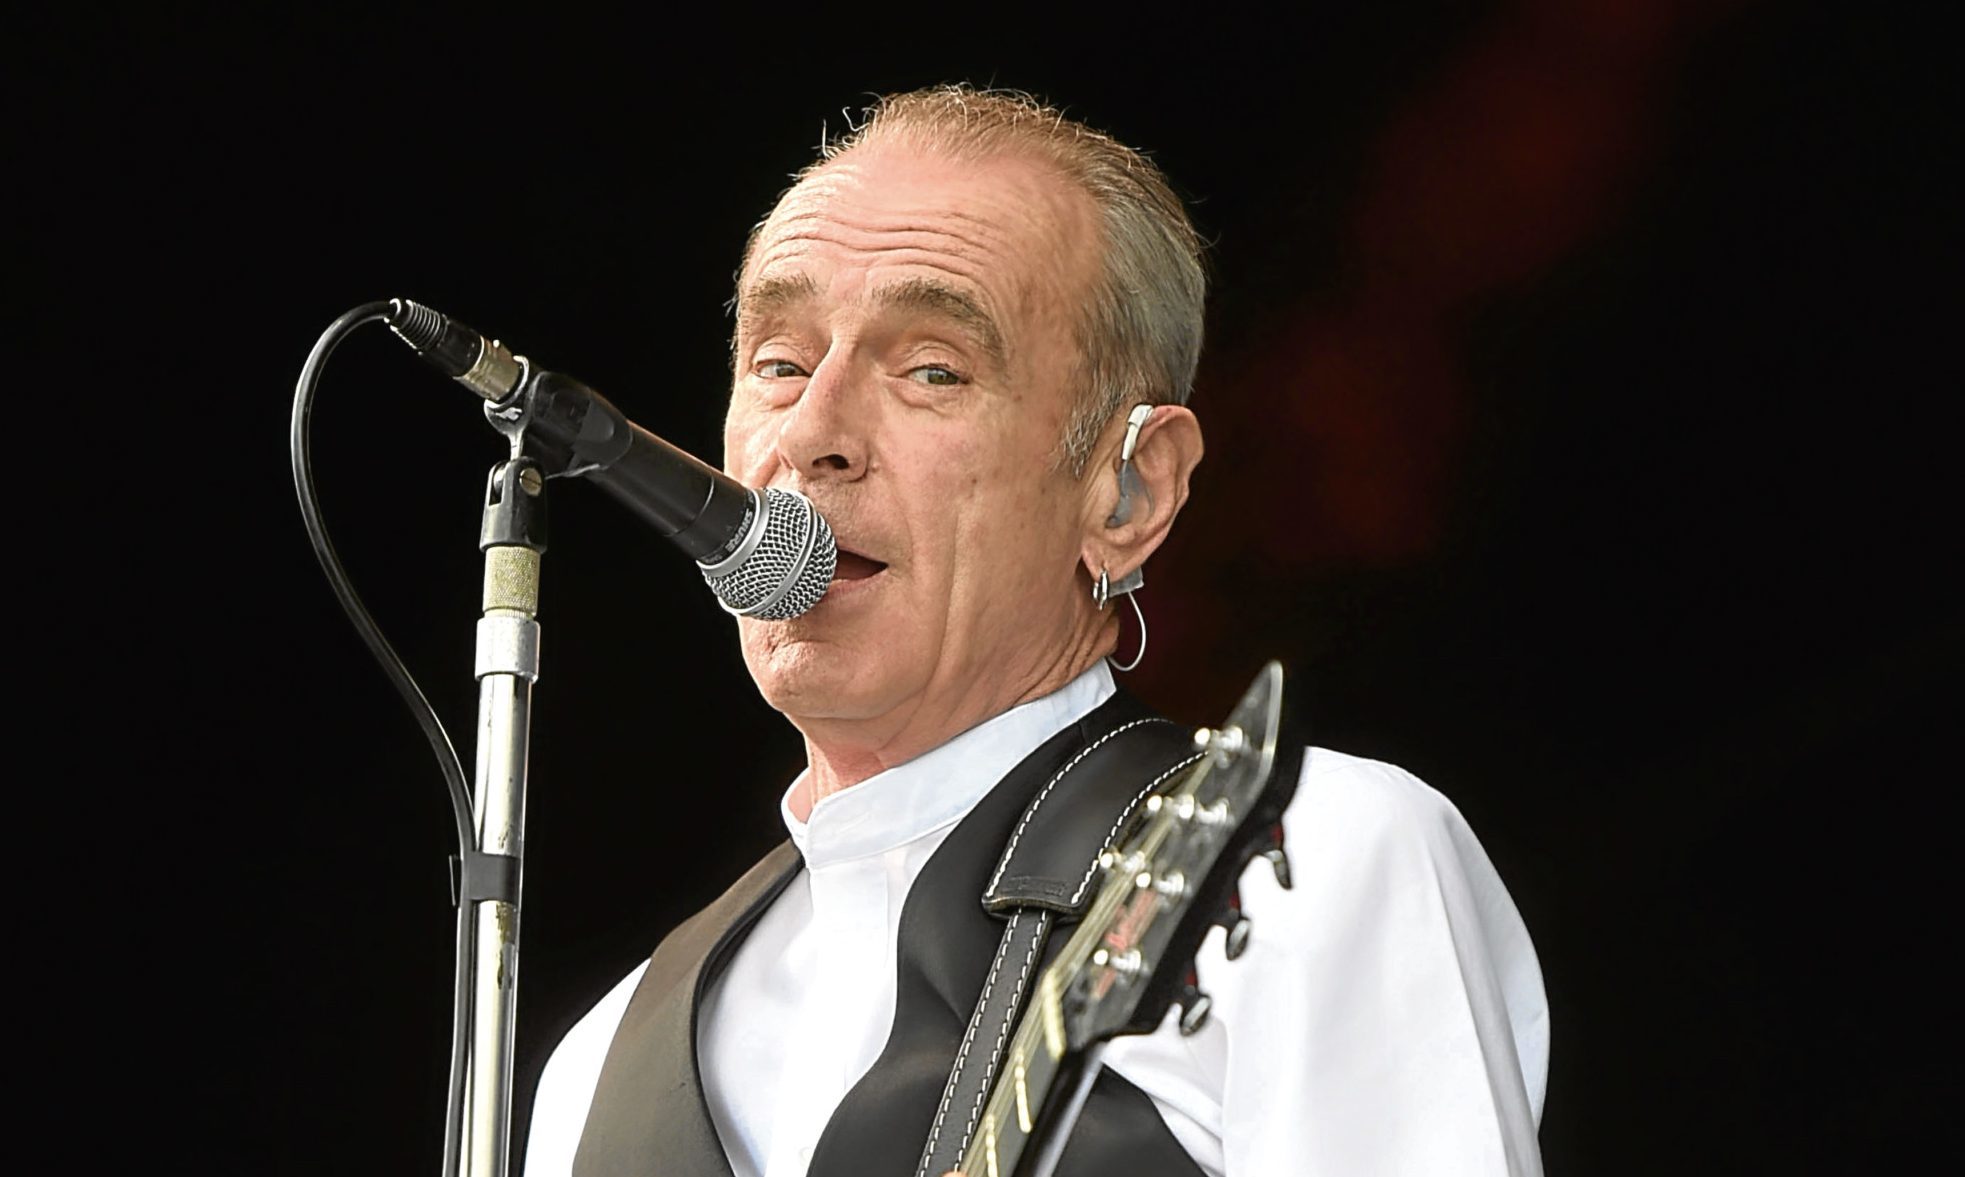 Francis Rossi performs earlier this year (Tom Dulat/Getty Images)